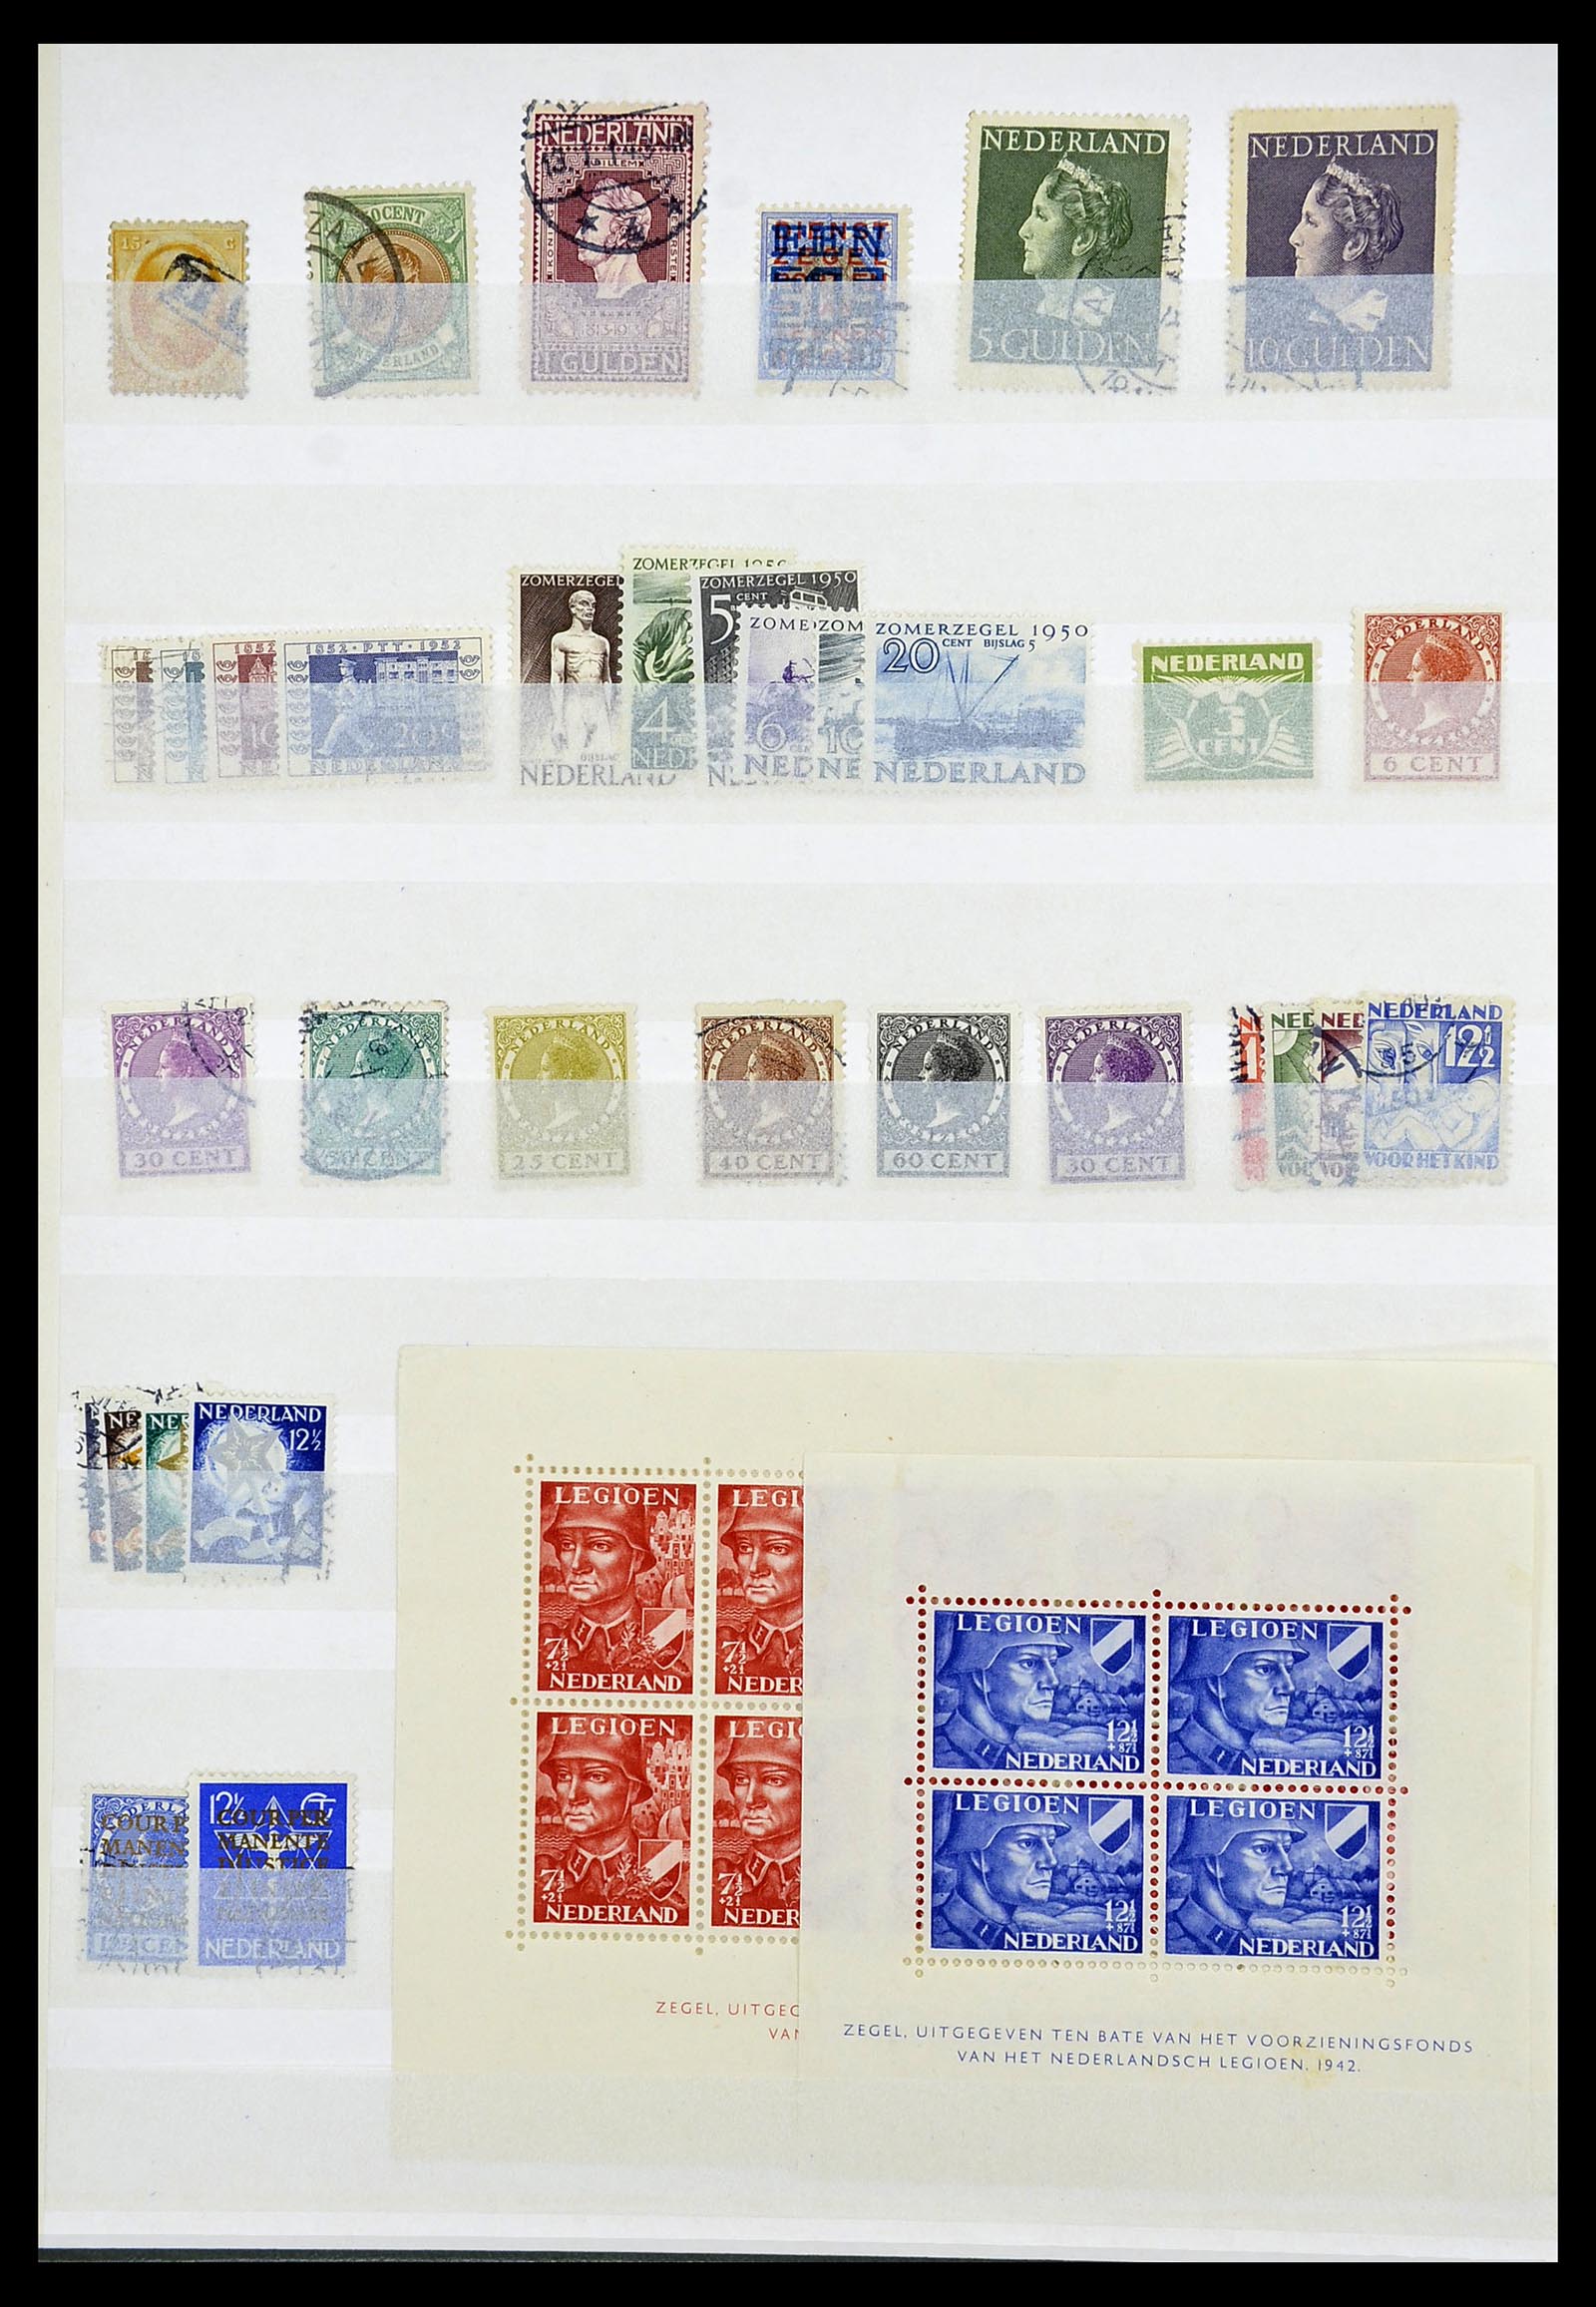 34263 020 - Stamp collection 34263 European countries key stamps 1840-1950.